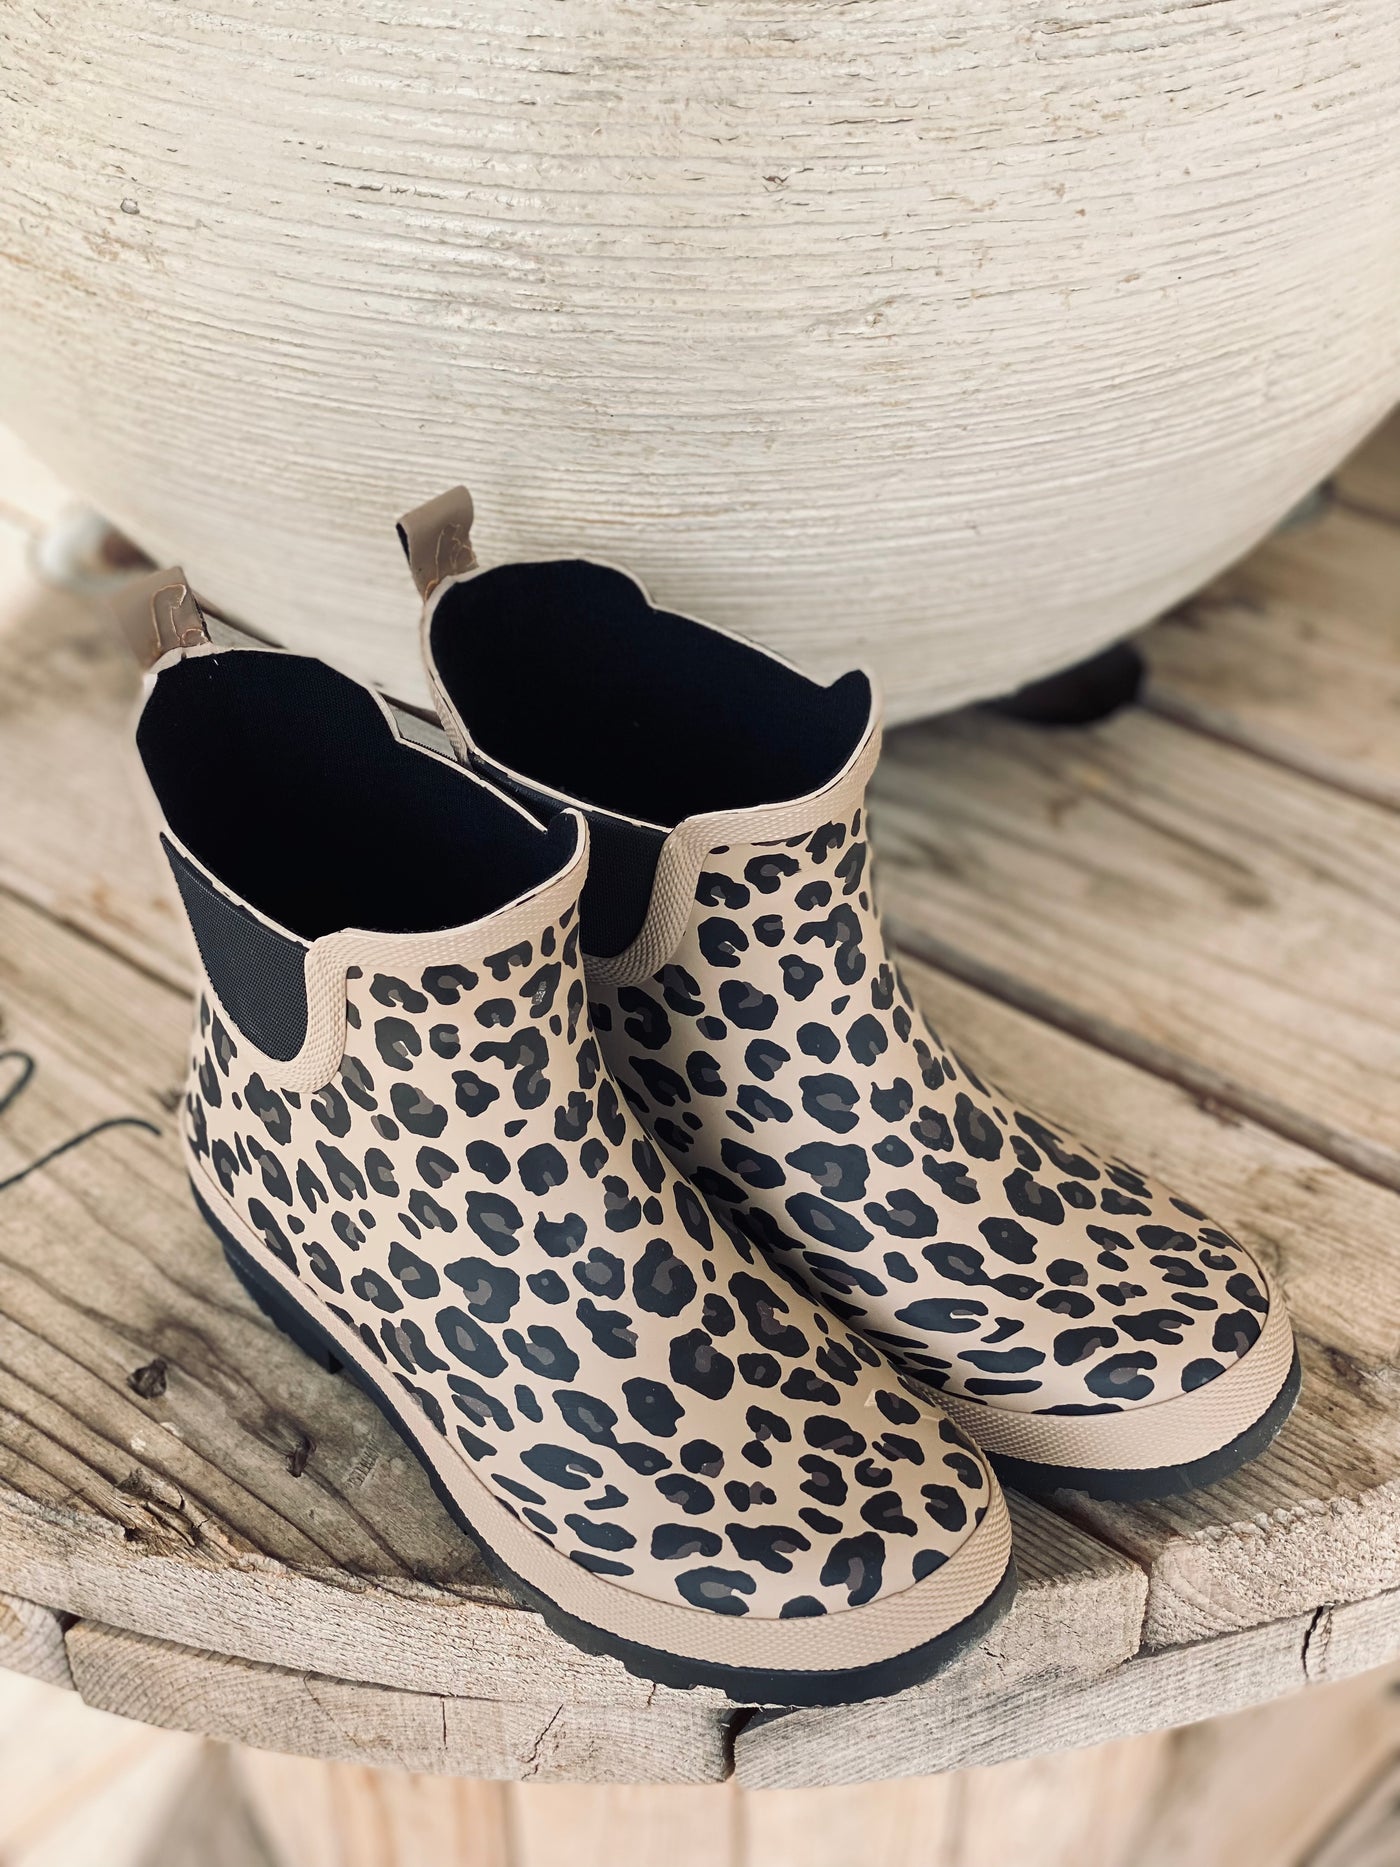 Corky’s Leopard Yikes Ankle Rain Bootie